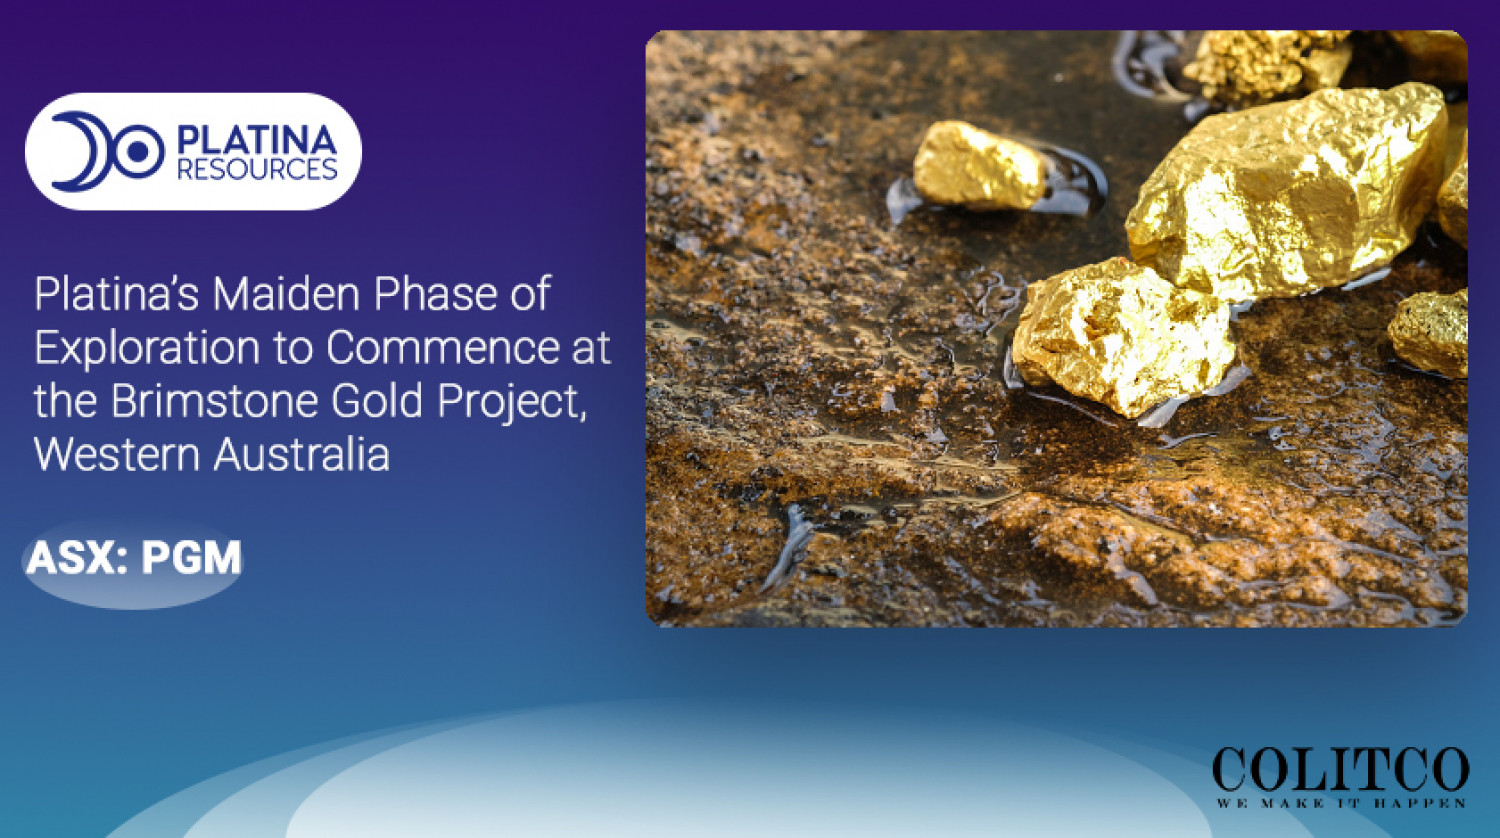 Platina’s Maiden Phase Of Exploration To Commence At The Brimstone Gold Project, Western Australia Infographic